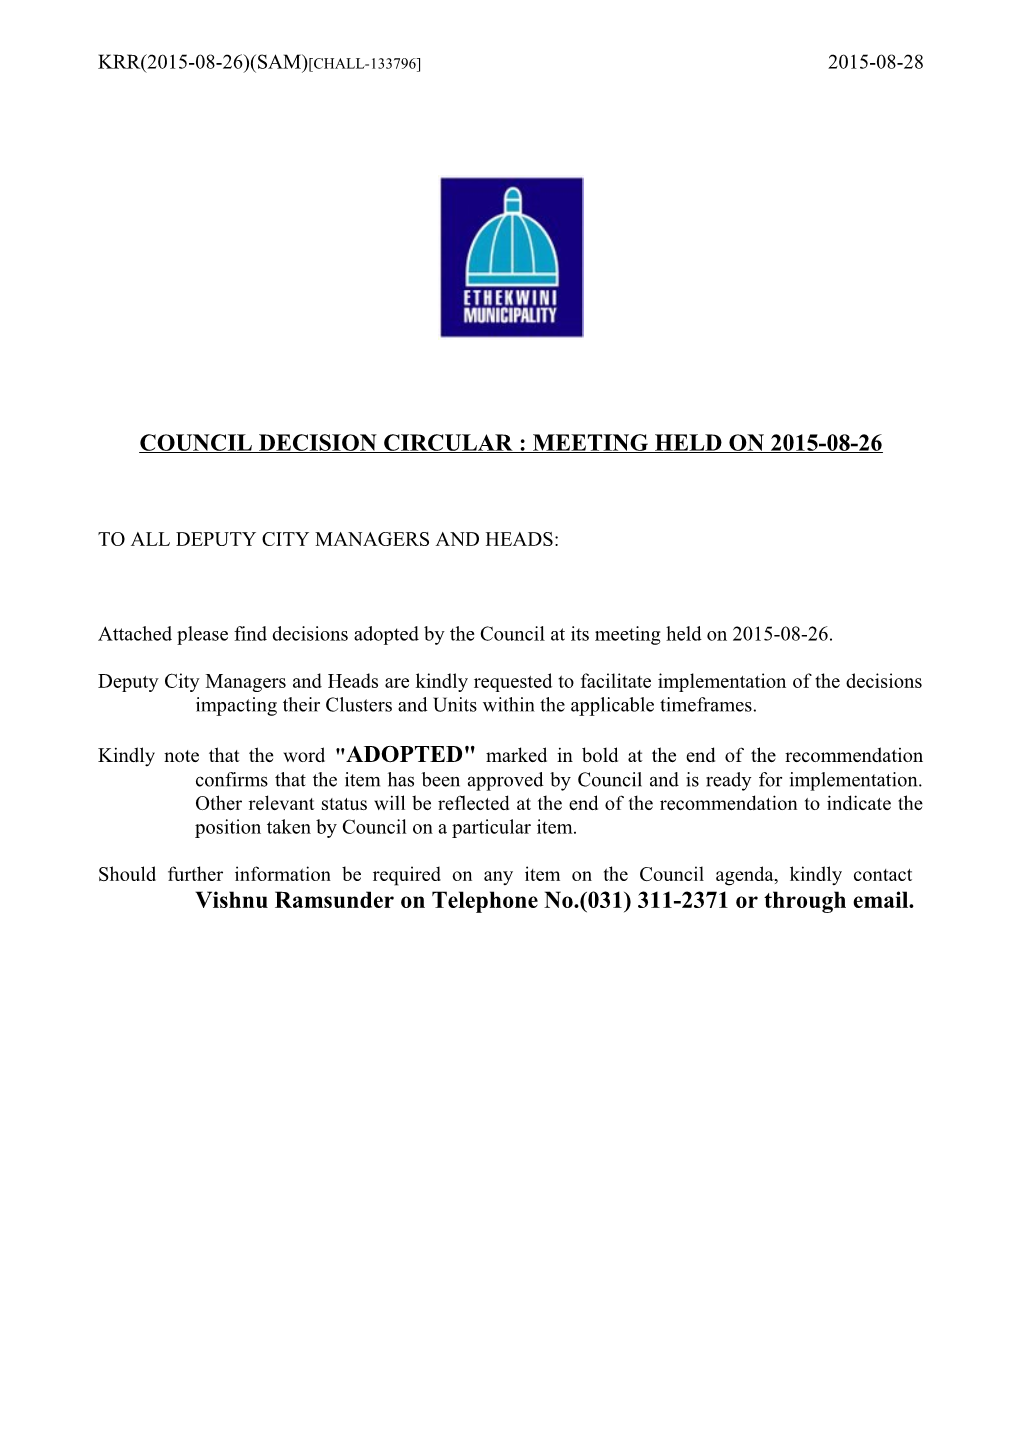 Council Decision Circular : Meeting Held on 2015-08-26